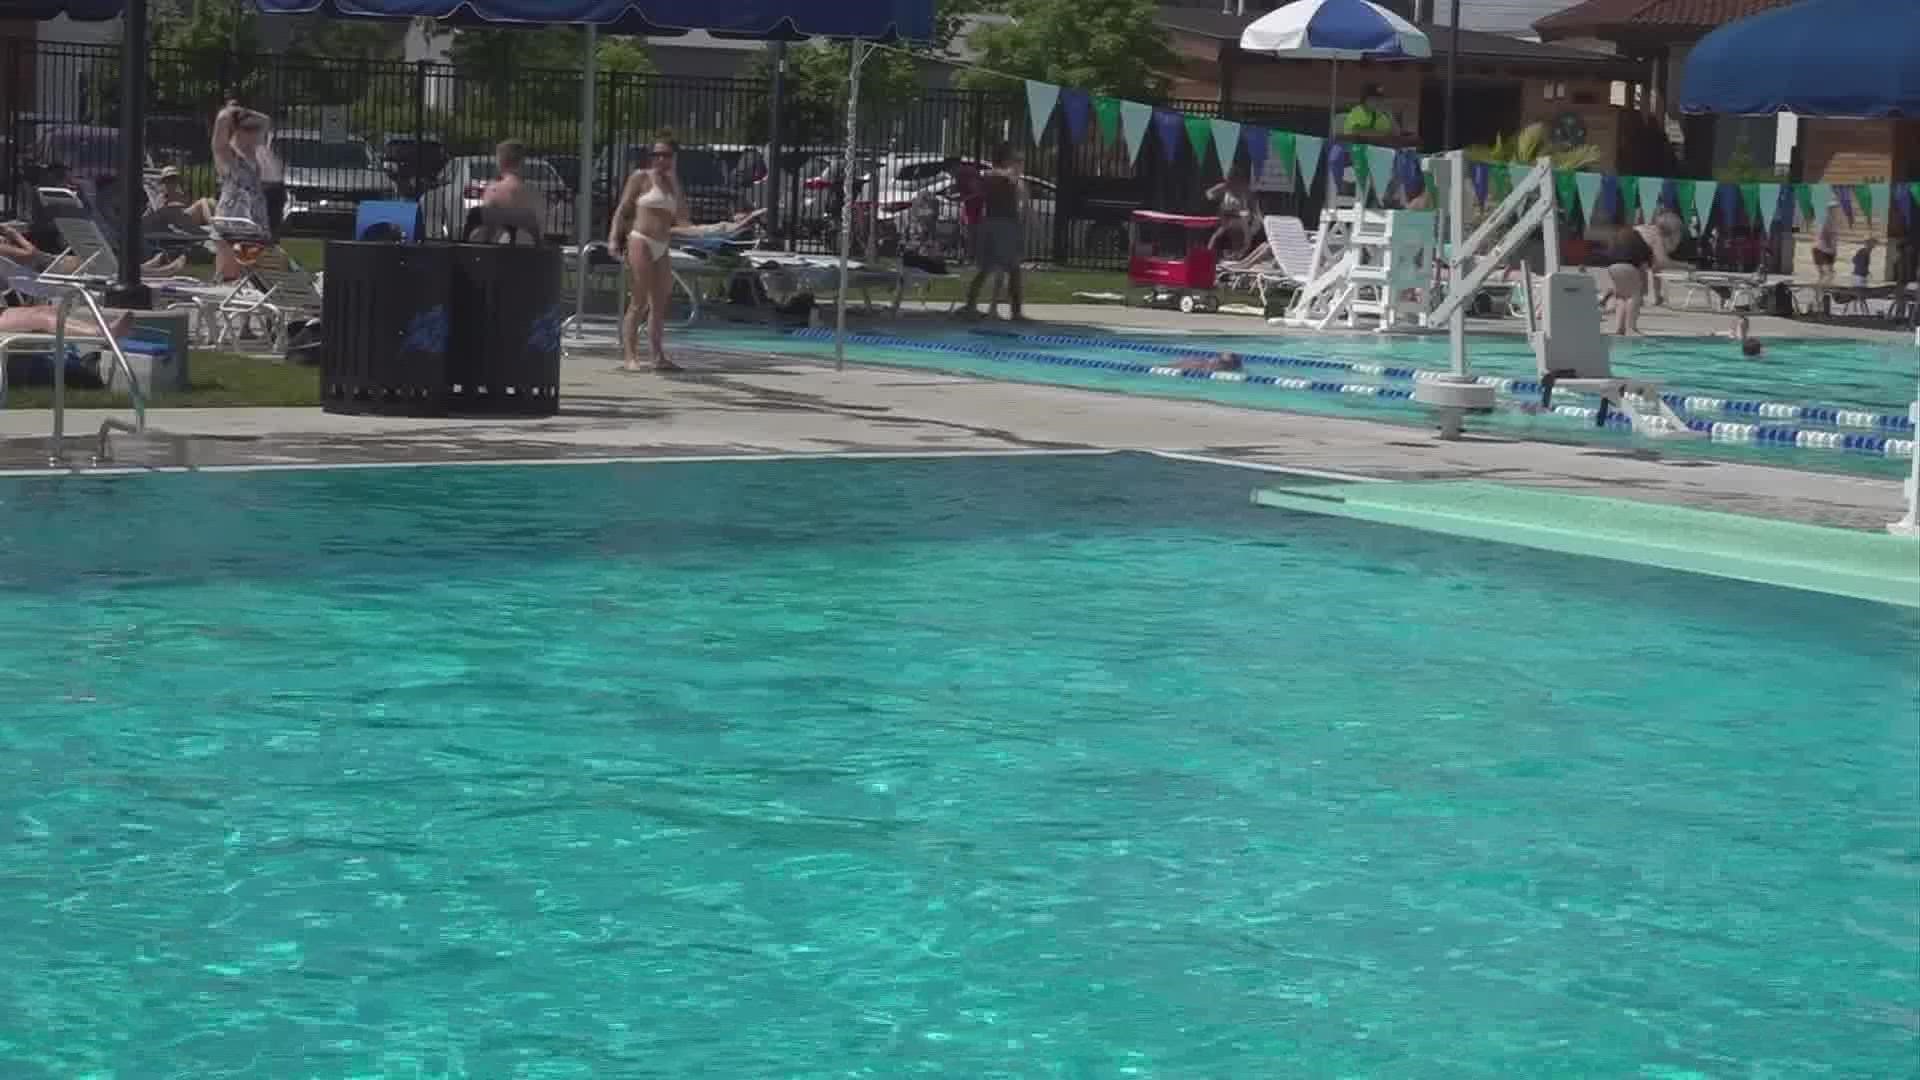 A spokesperson for Hilliard City Pools says the city needs about 30-50 lifeguards in order to be in full working operation.